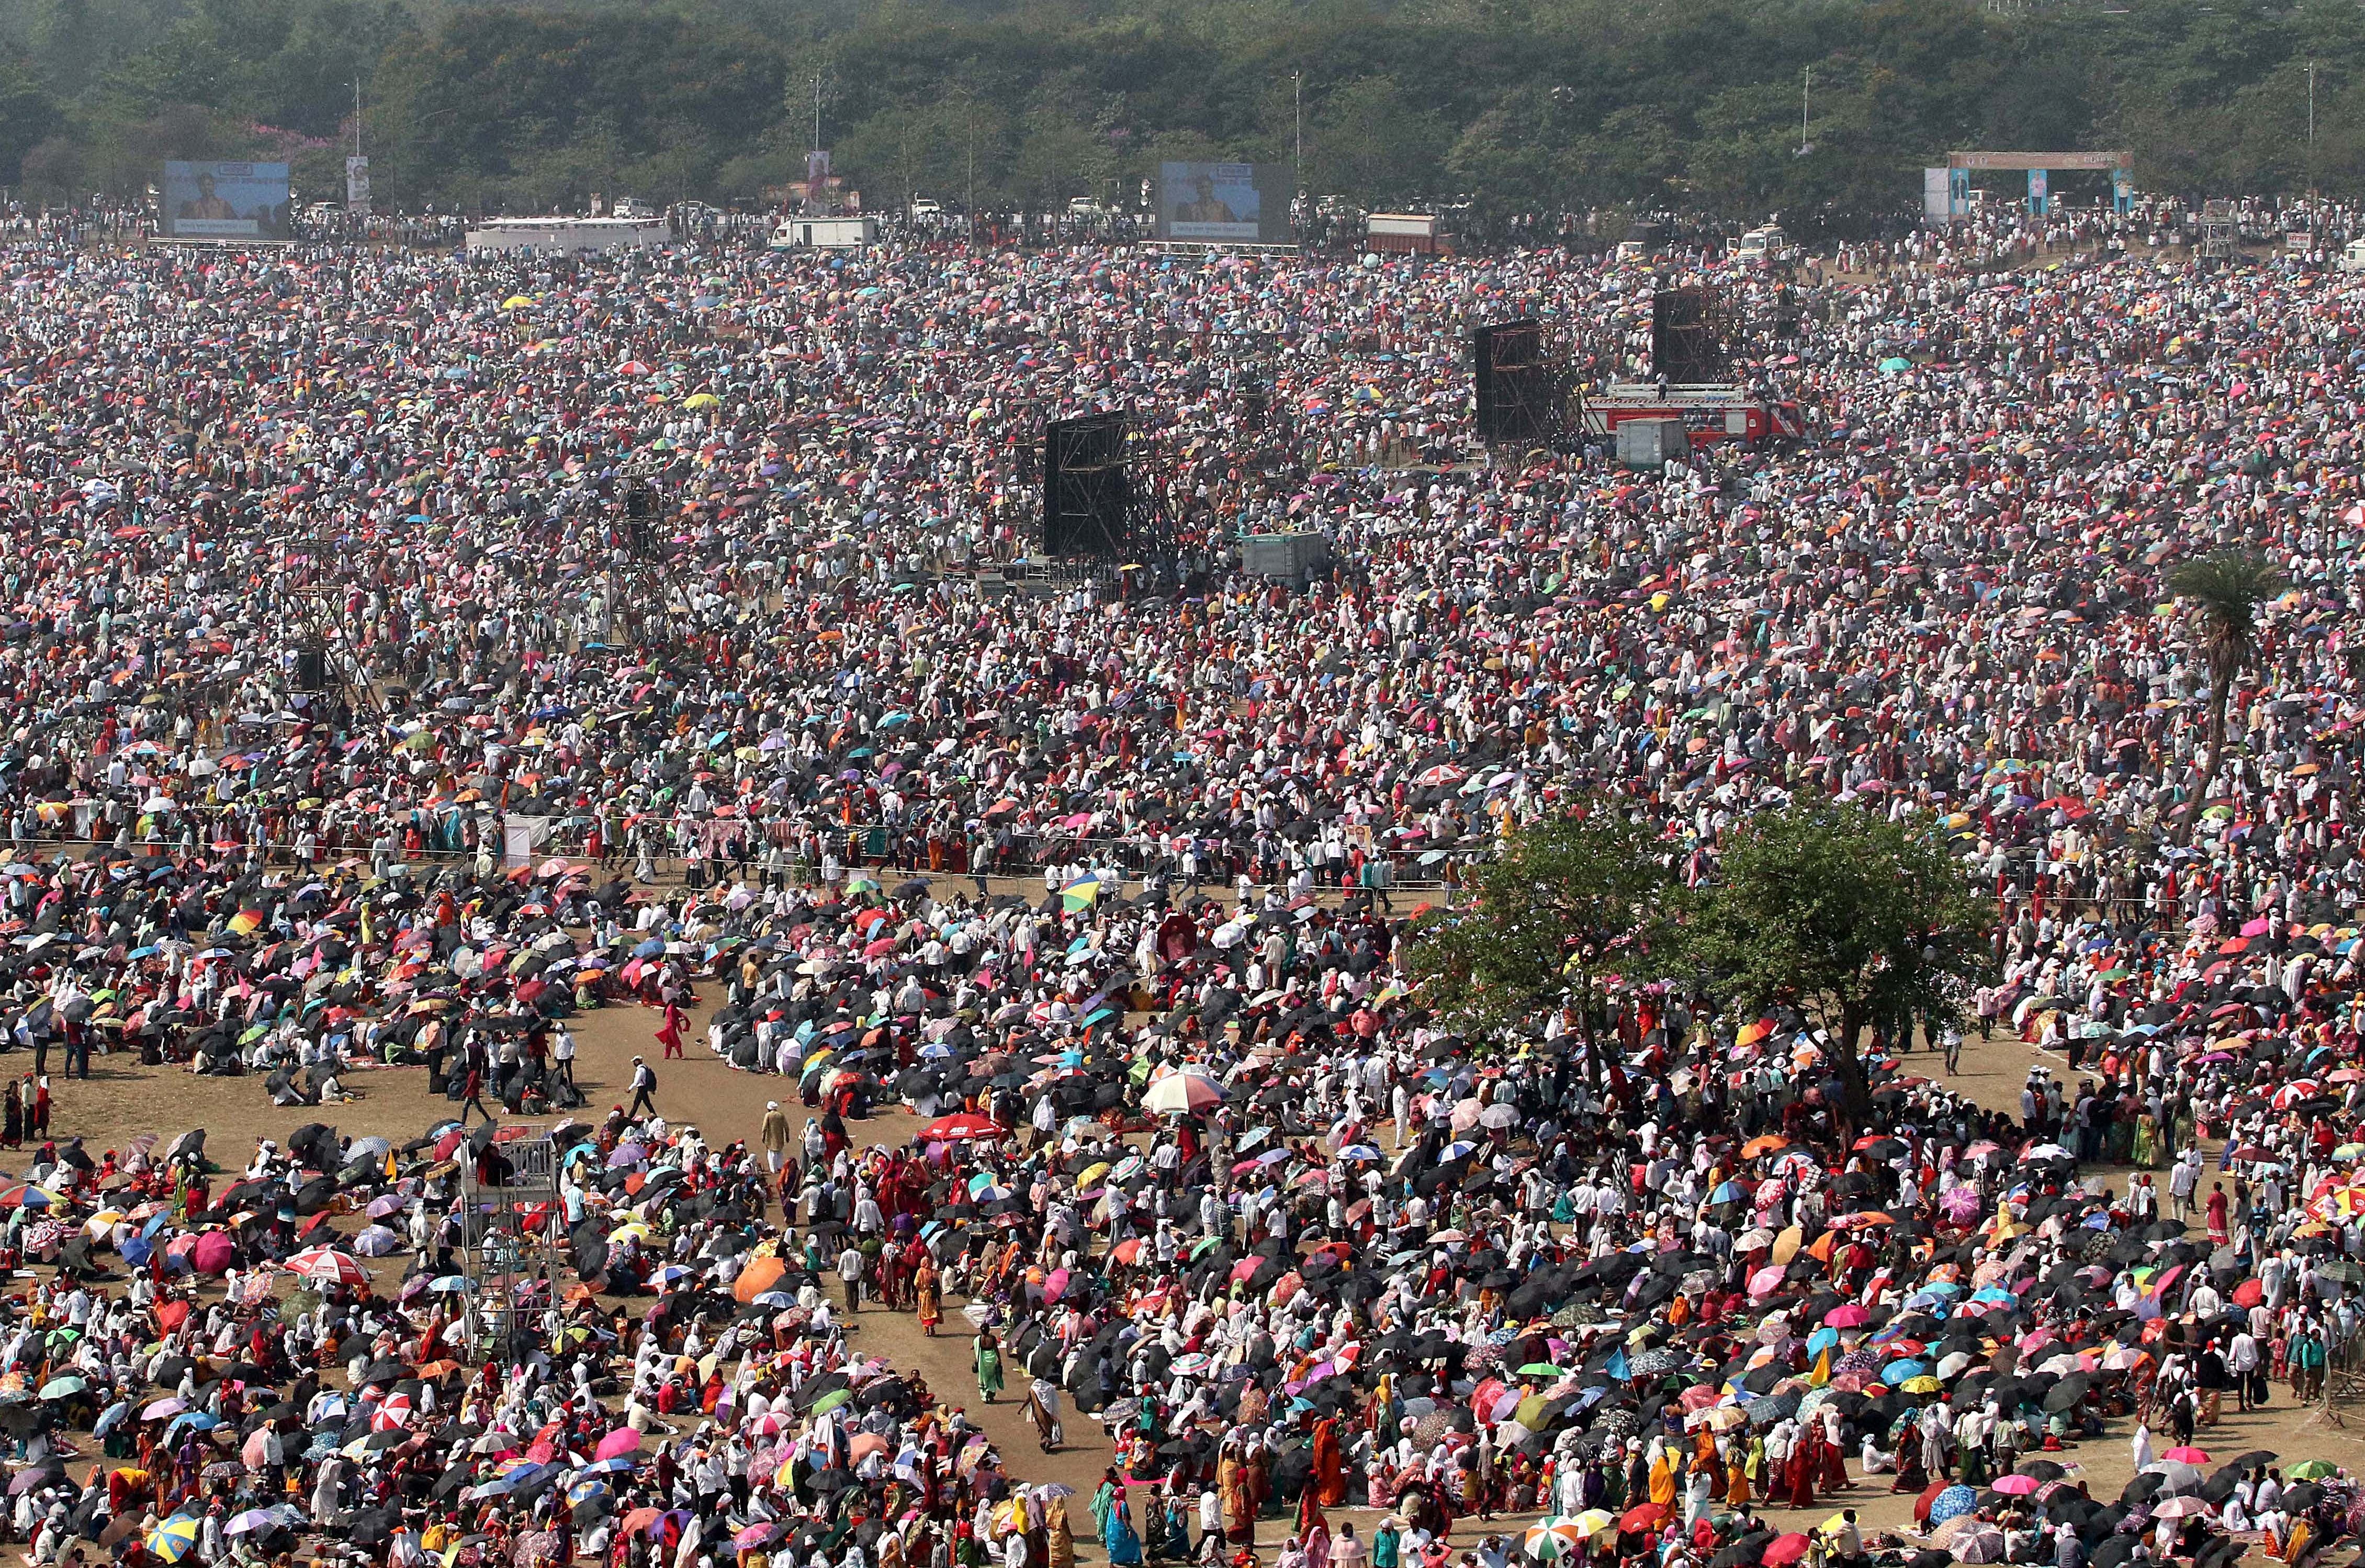 People attend an award function during a hot day on the outskirts of Mumbai on 16 April